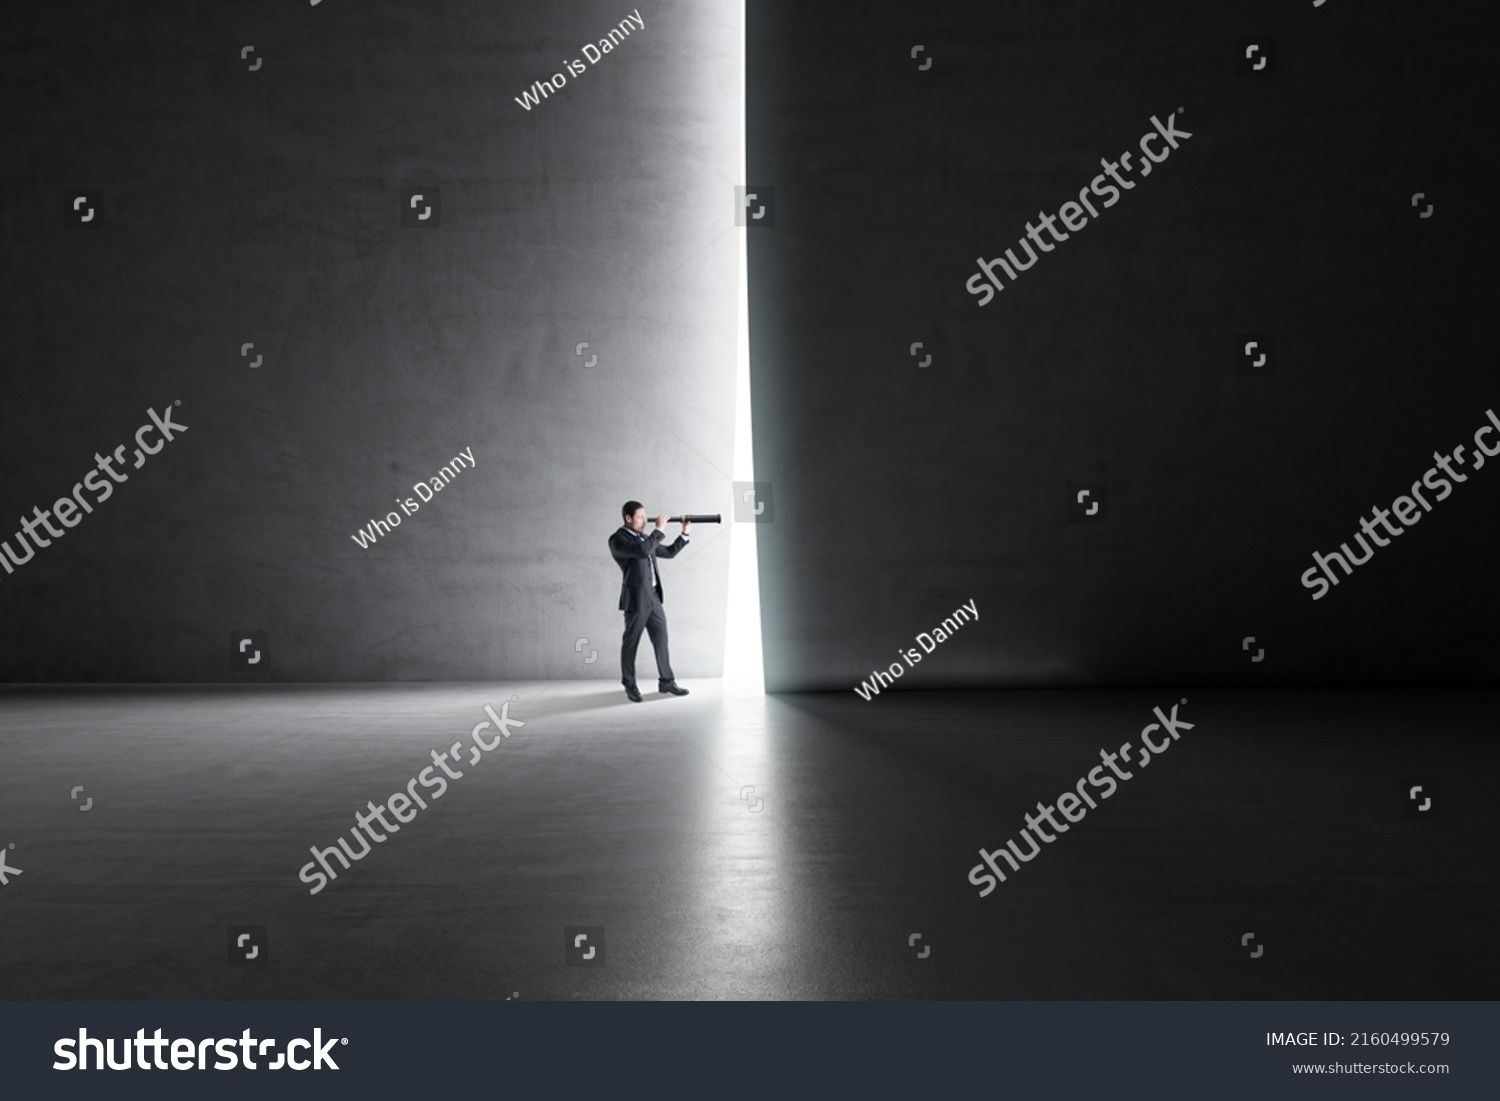 Looking in the future and busines development concept with businessman back view using spyglass looking through a light hole in a dark wall in empty spacious hall #2160499579